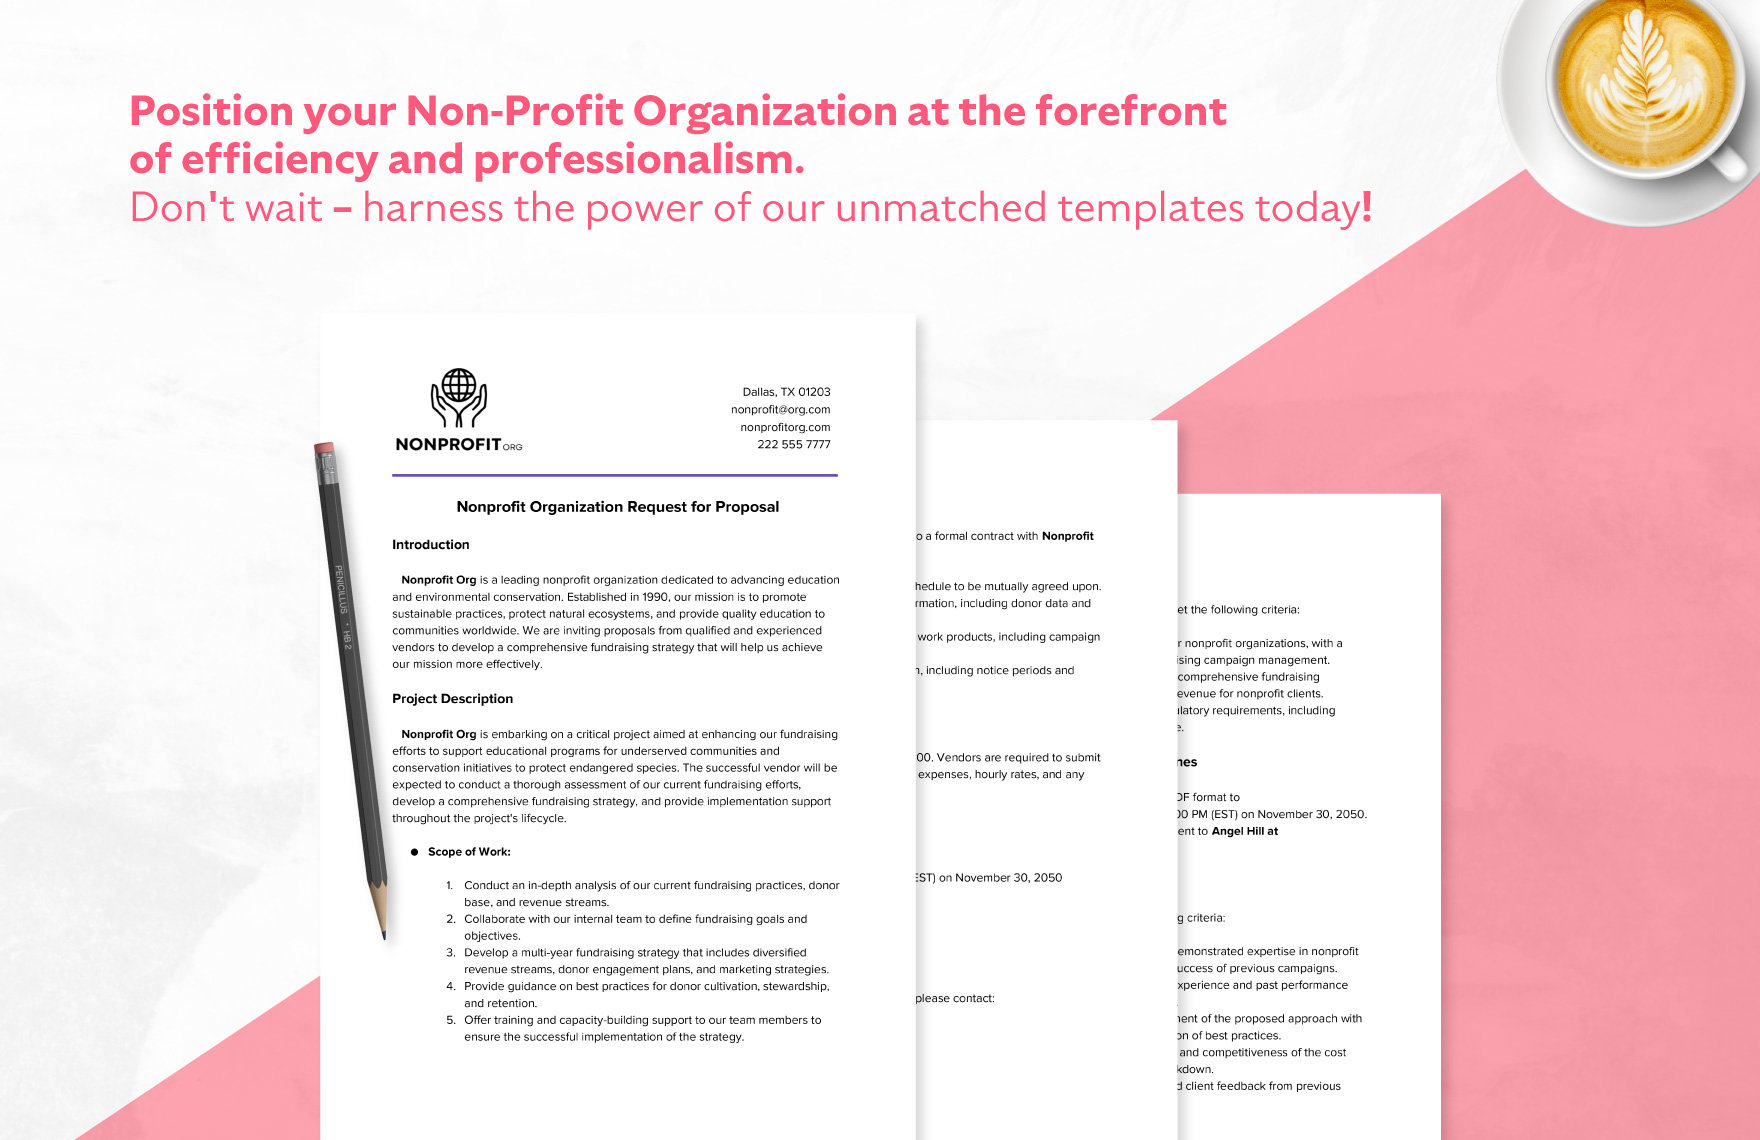 Nonprofit Organization Request for Proposal Template